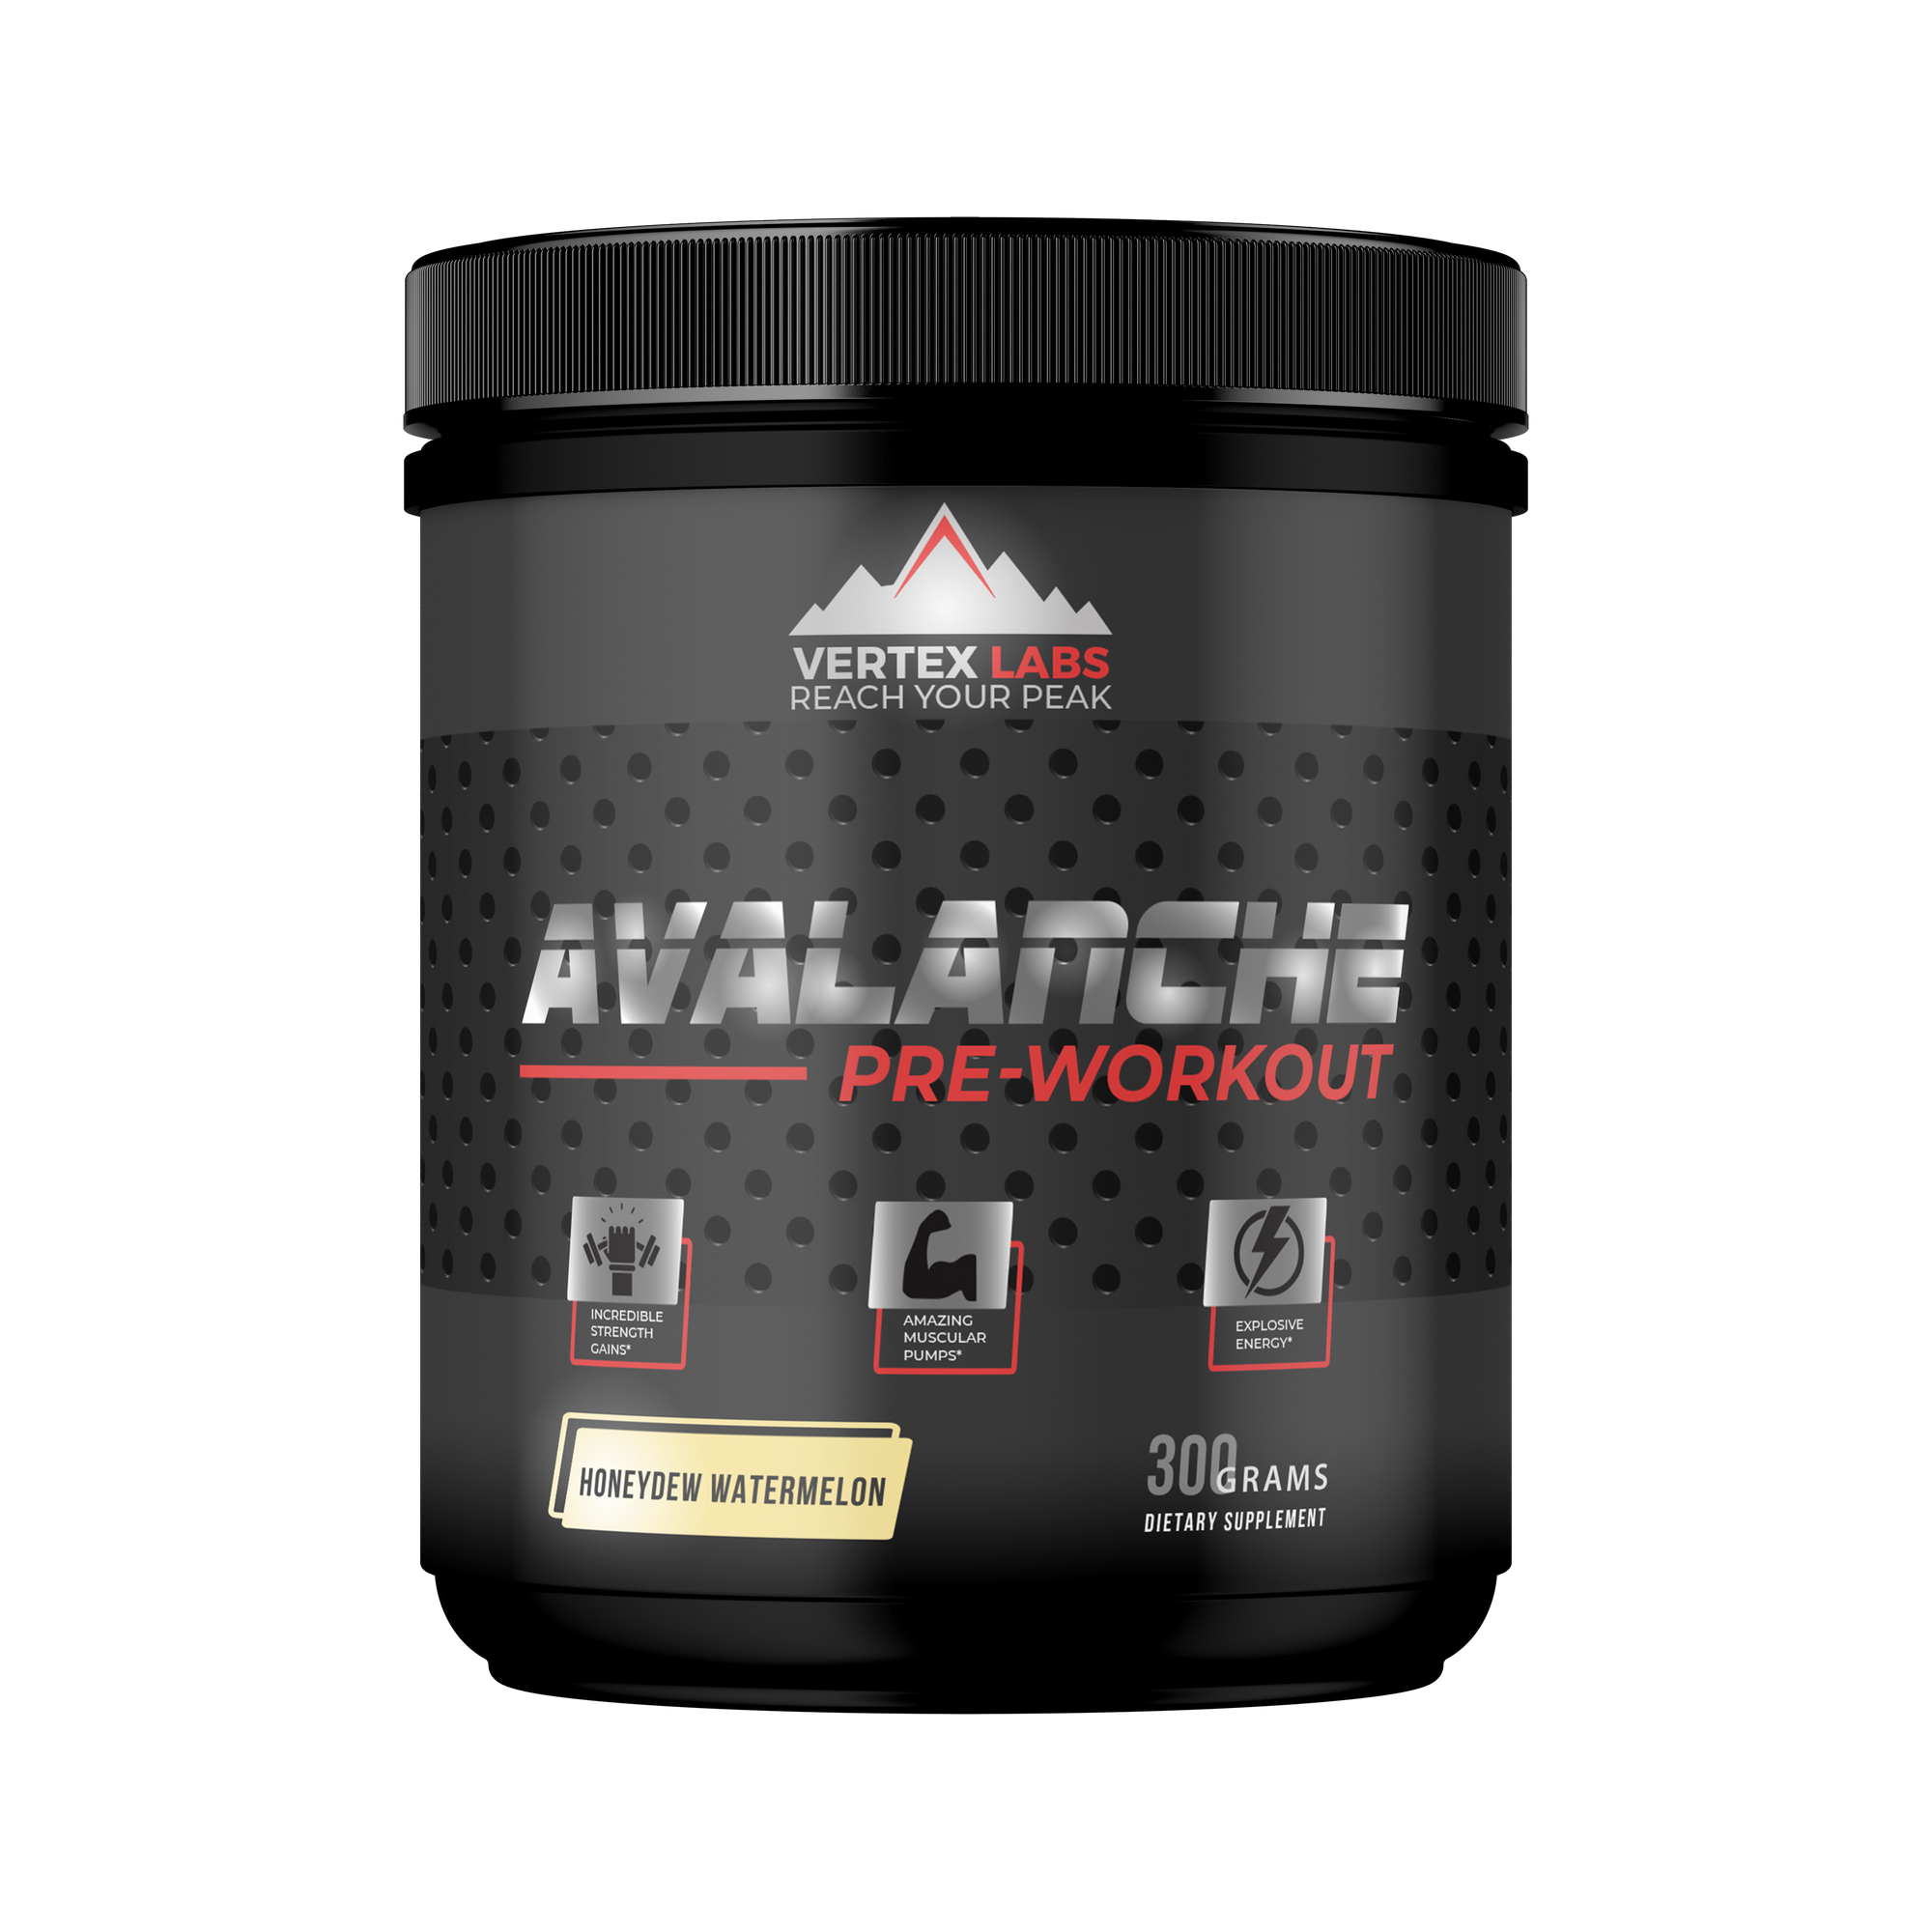 Avalanche - Pre-Workout